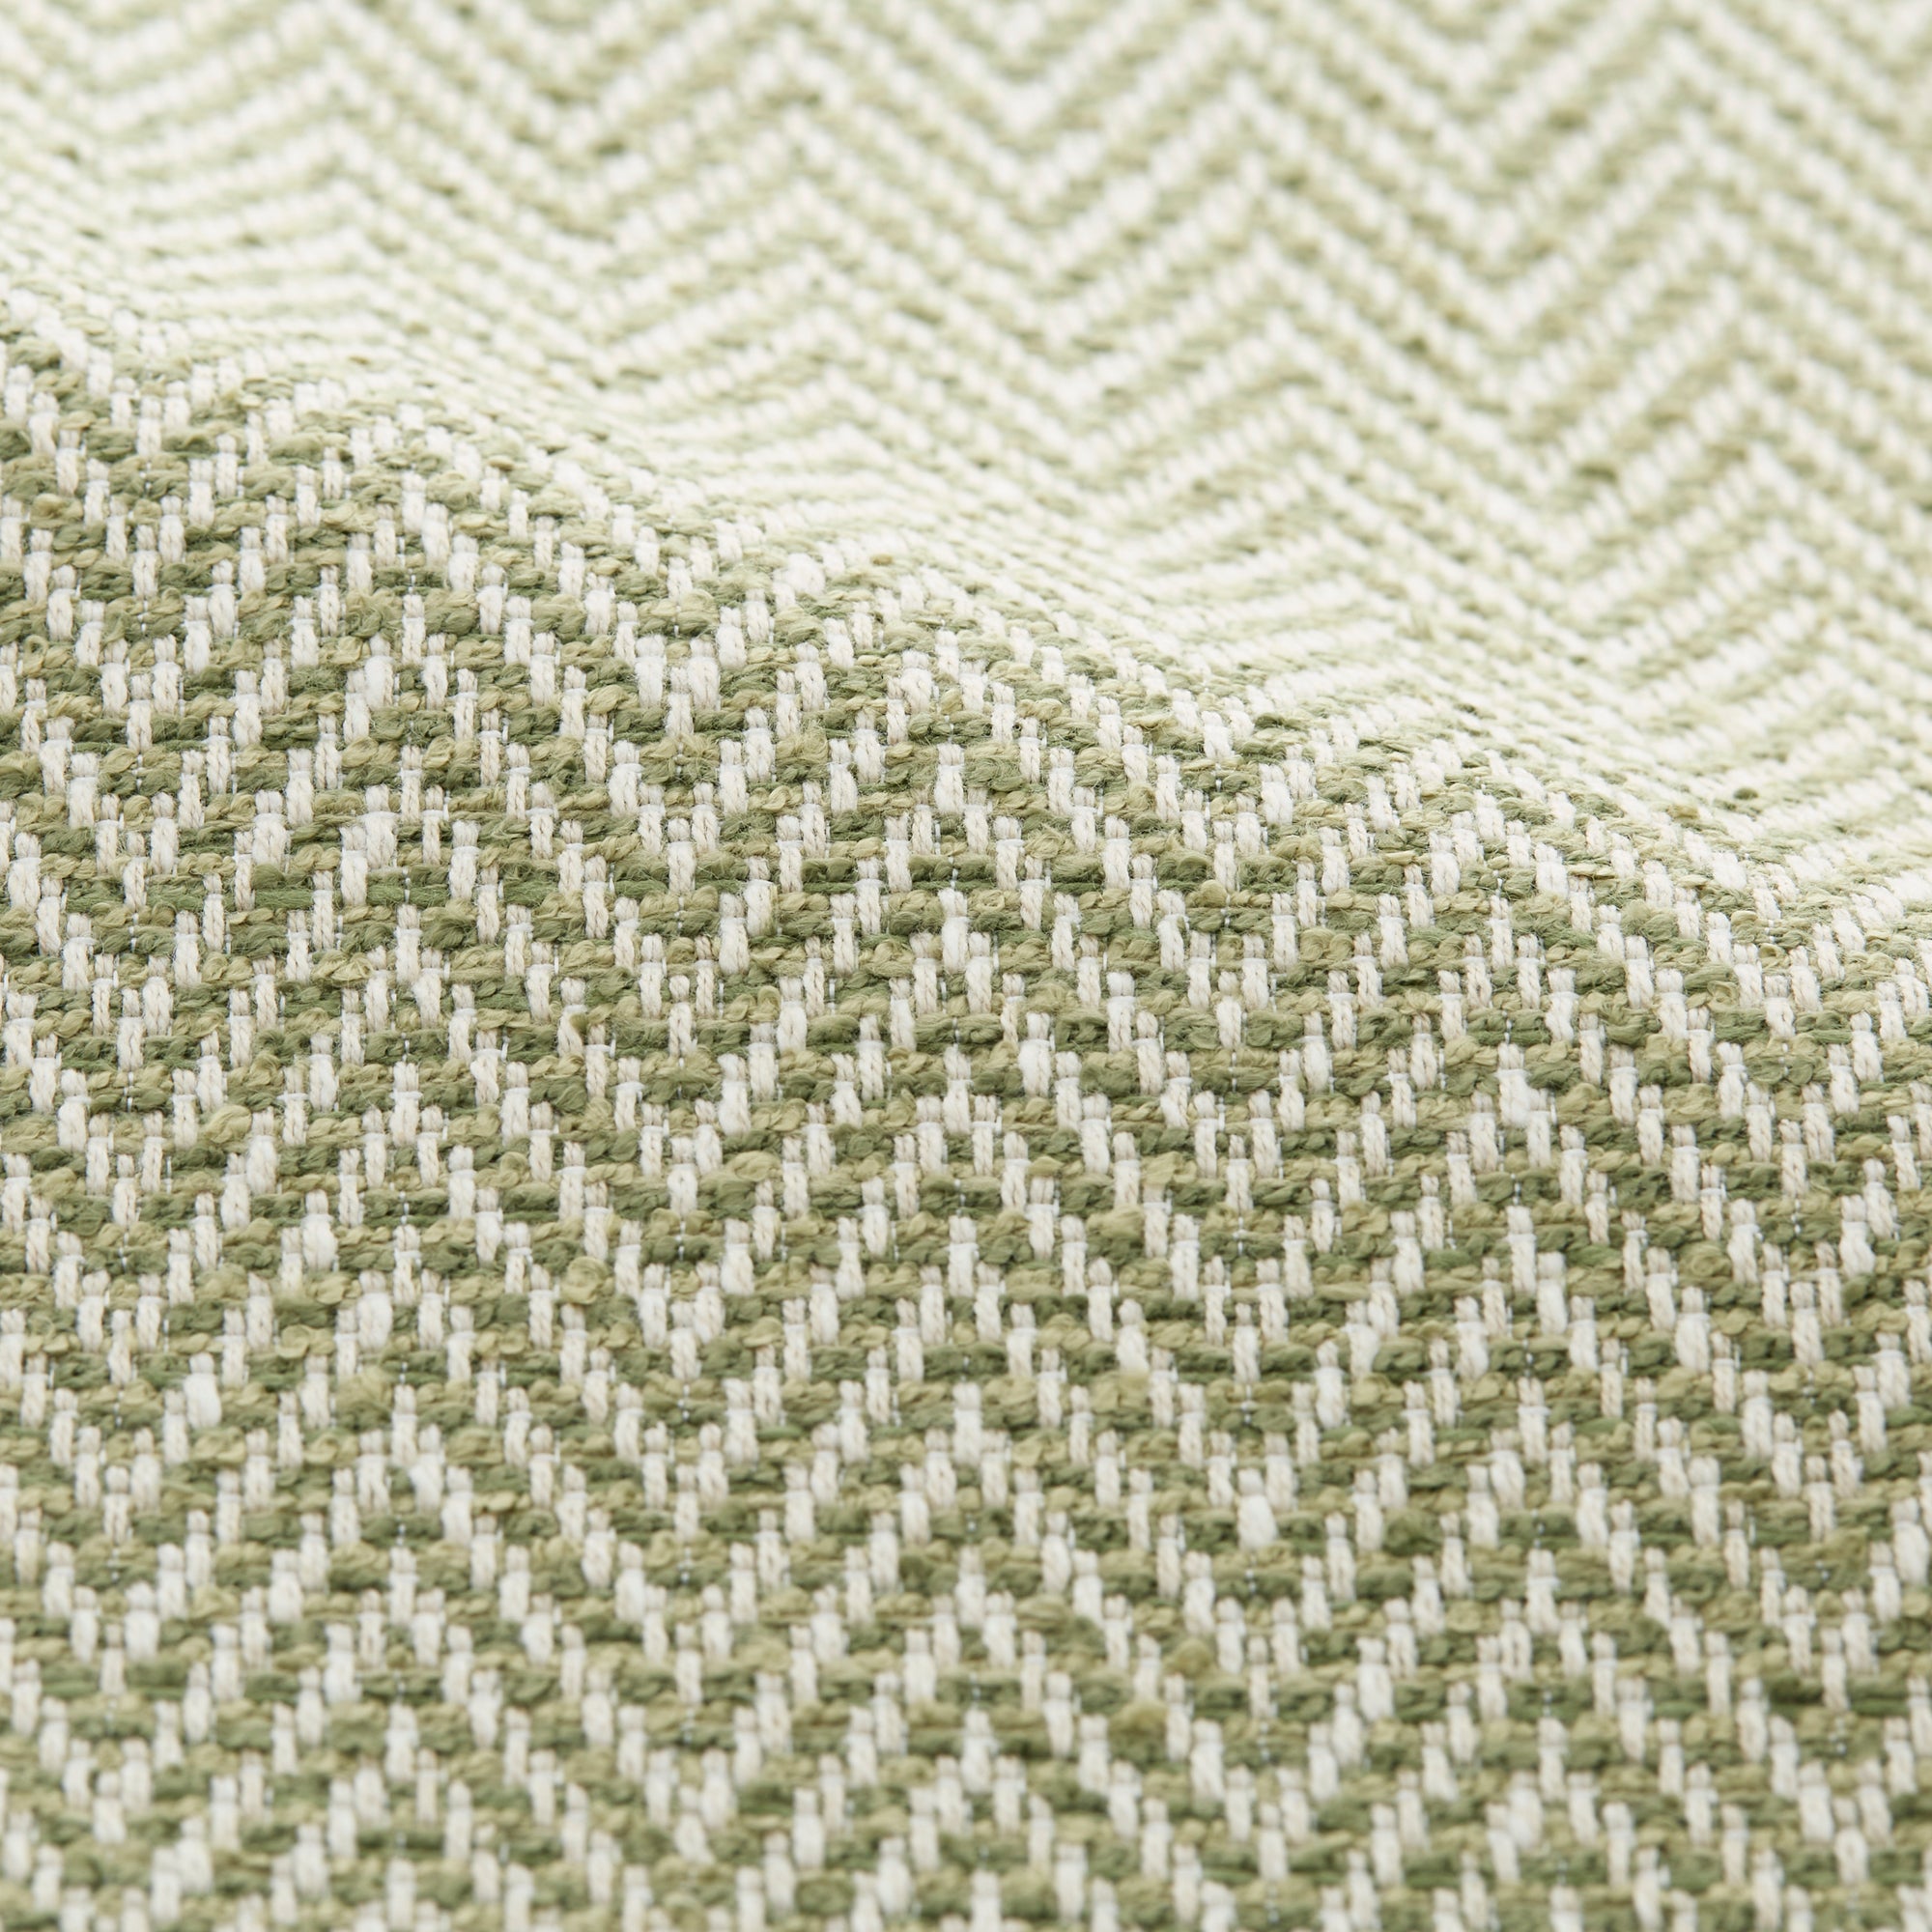 Everest Made to Measure Curtains Everest Olive